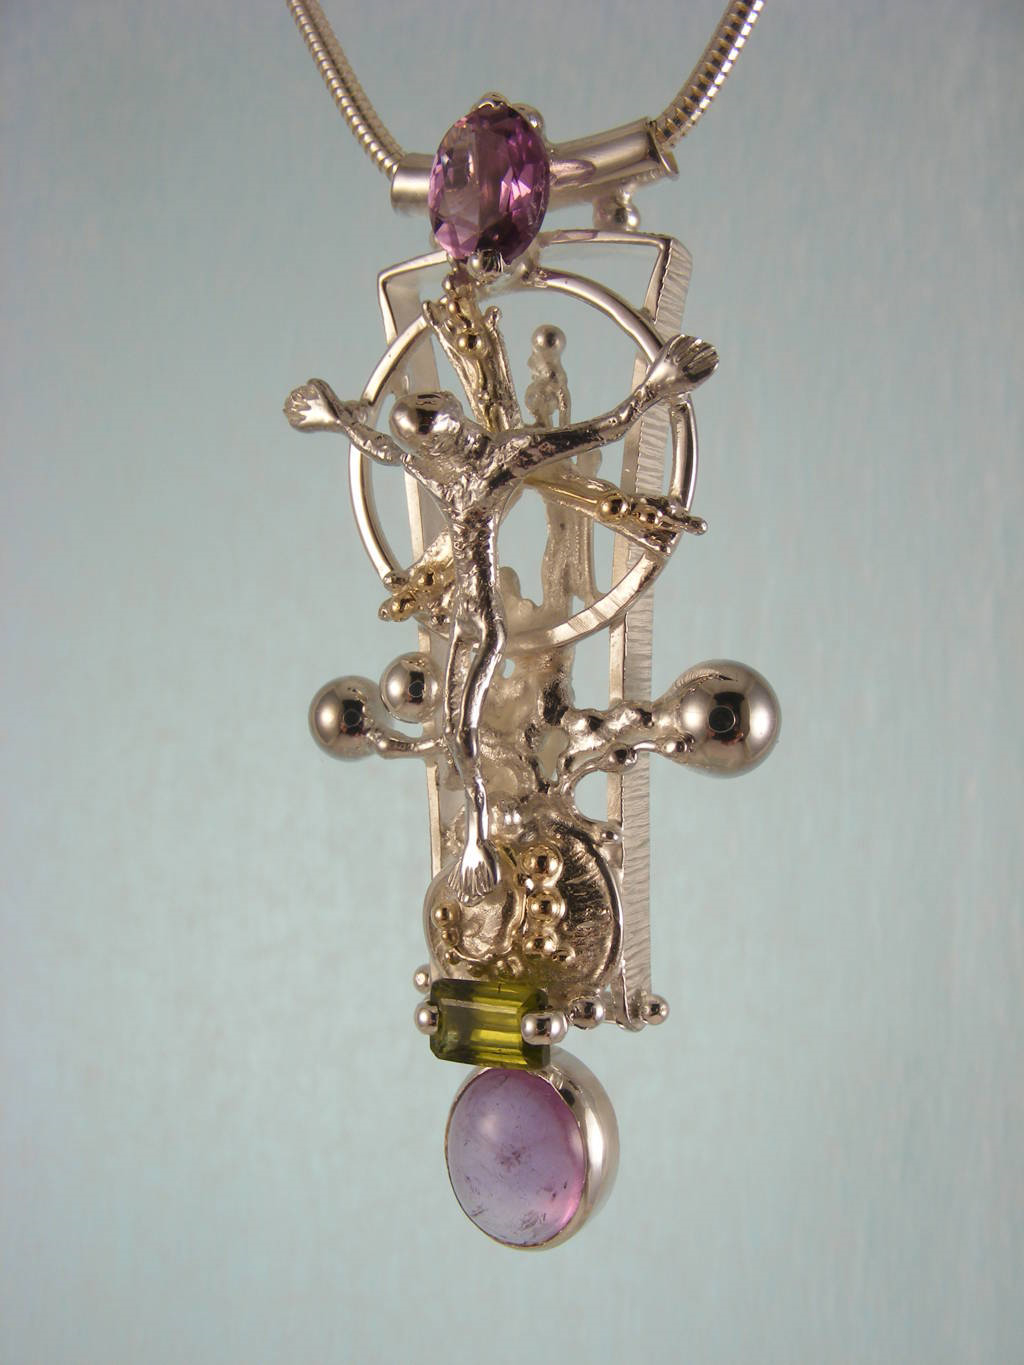 gregory pyra piro sculptural pendant 3050, mixed metal silver and gold pendant, pendants in art and craft galleries, sculptural pendant with amethyst and peridot